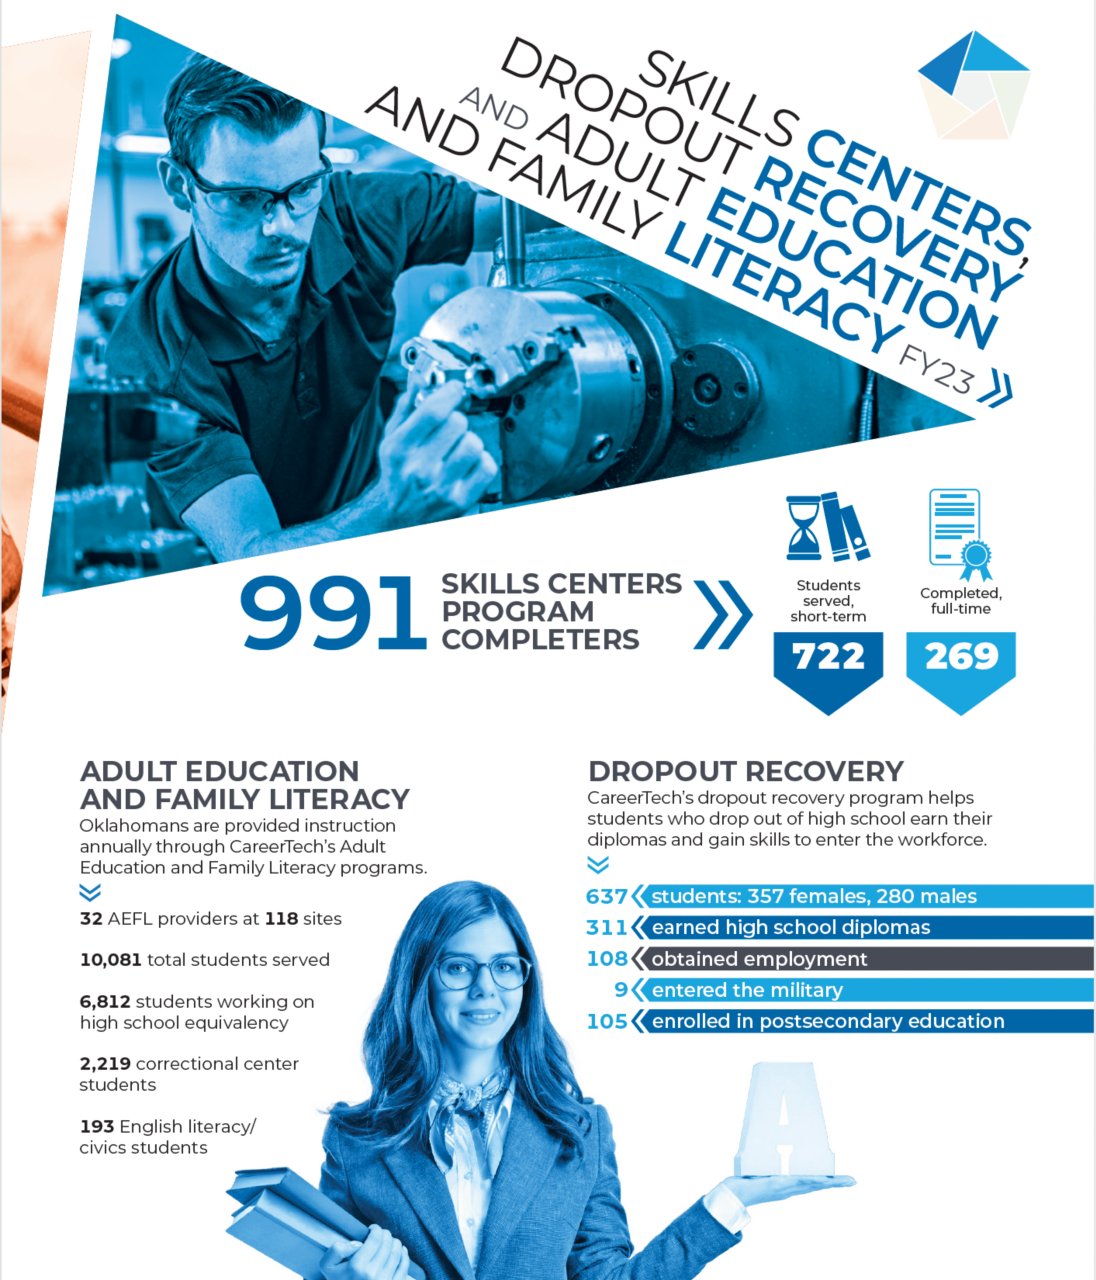 CareerTech Skills Centers FY 19 entrollments: 1,048 full-time students served; 861 short-term students served; 159 partner program students served; 637 full-time completed students; 90.93% positive placement; and $12.97 average hourly wage